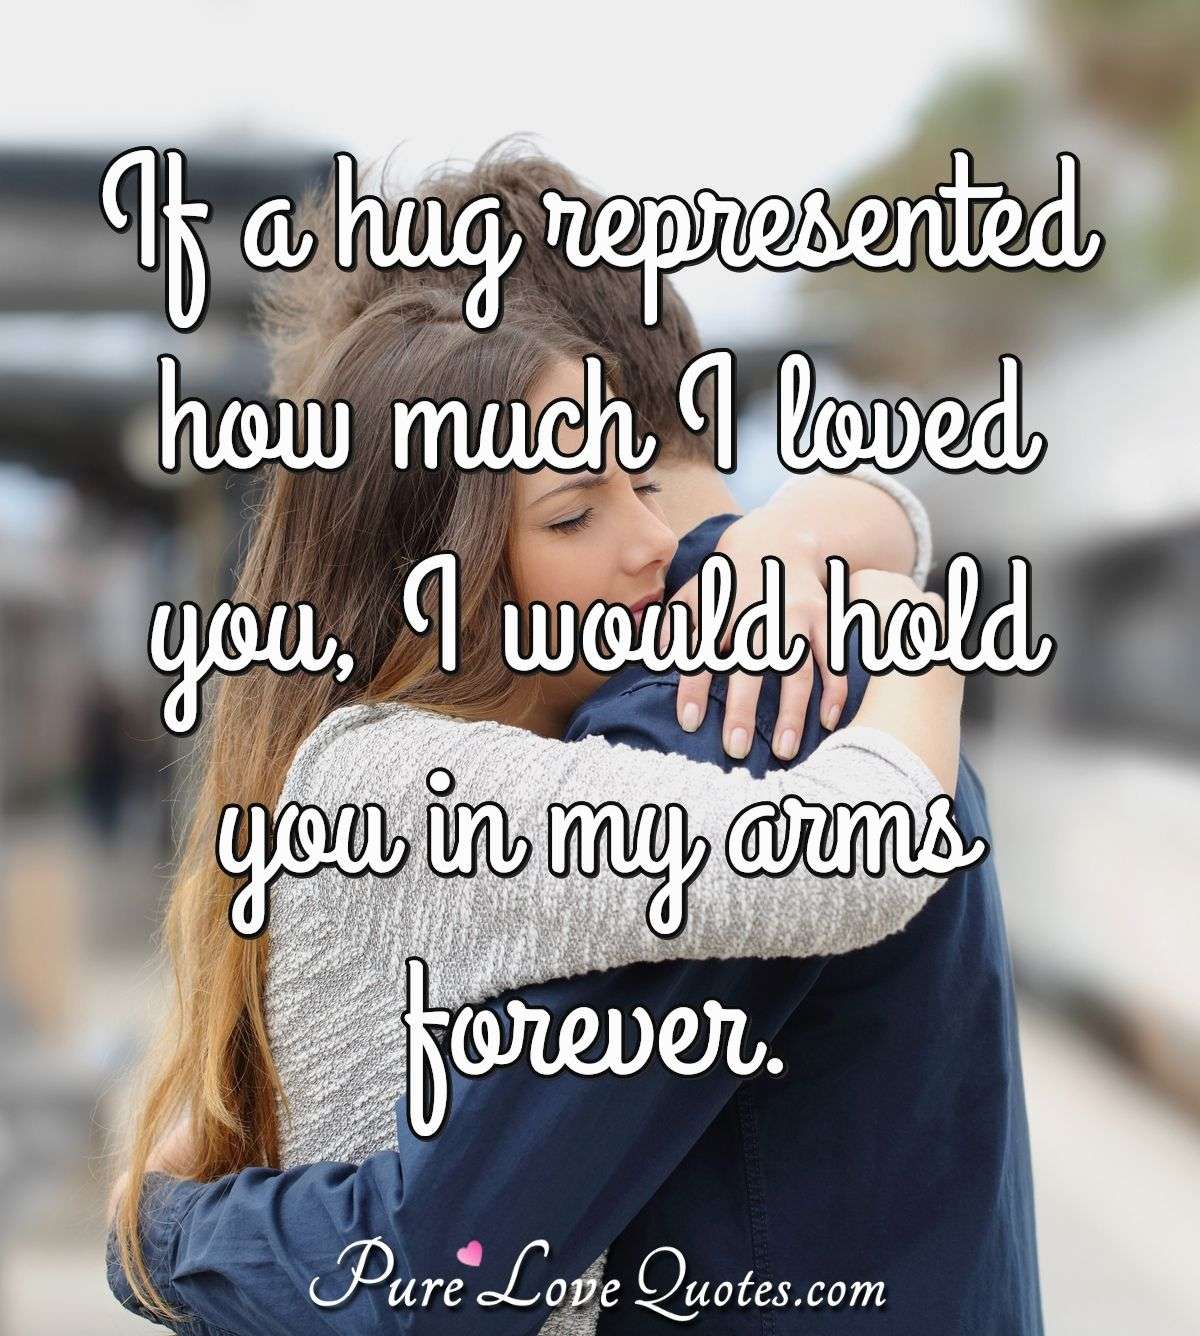 couple love hugs with quotes